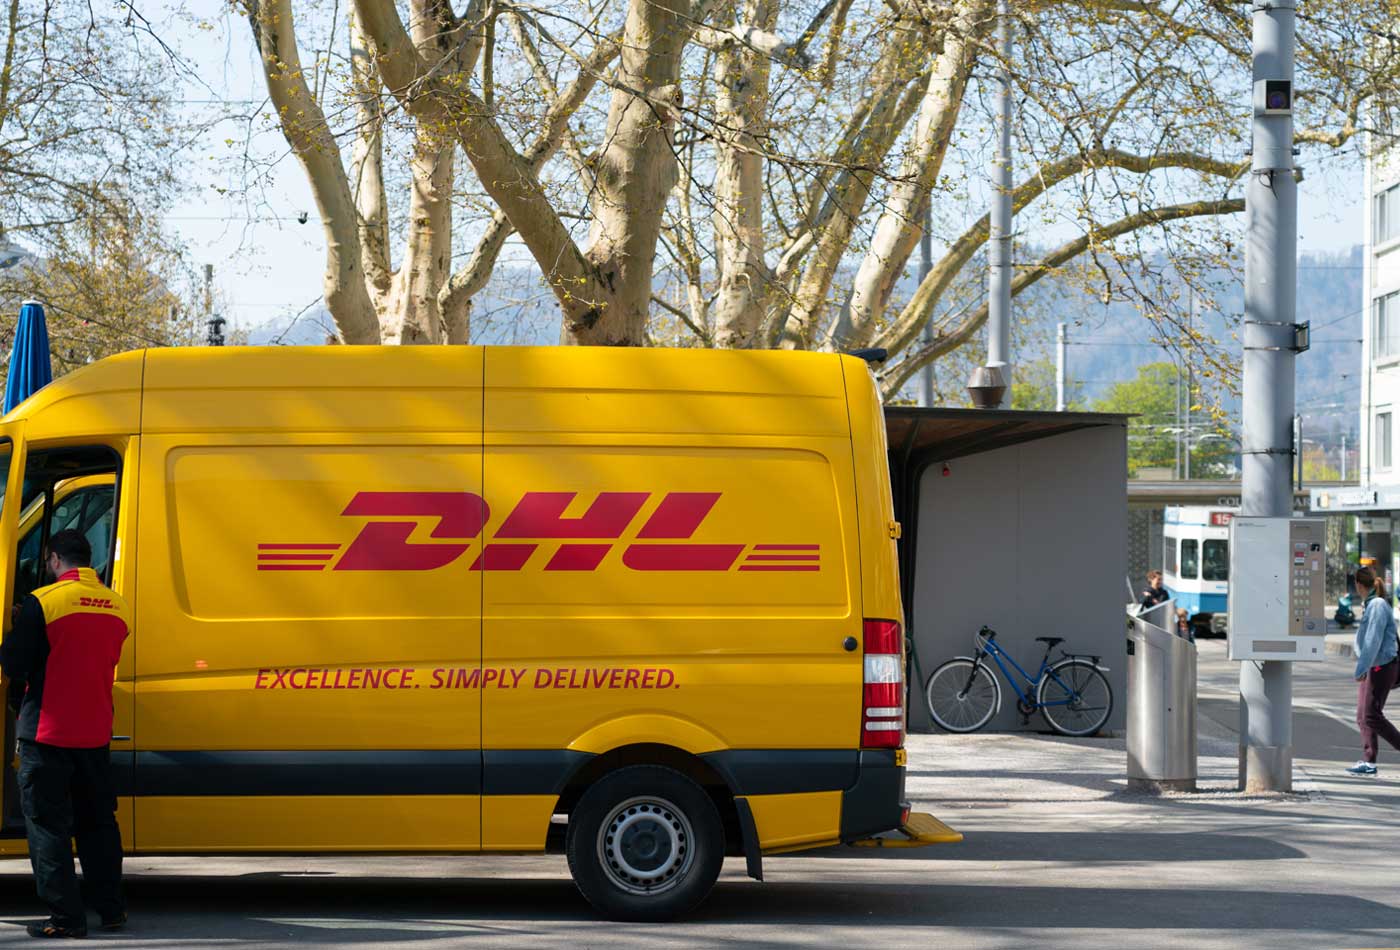 How to start a courier business in the UK - DHL courier van